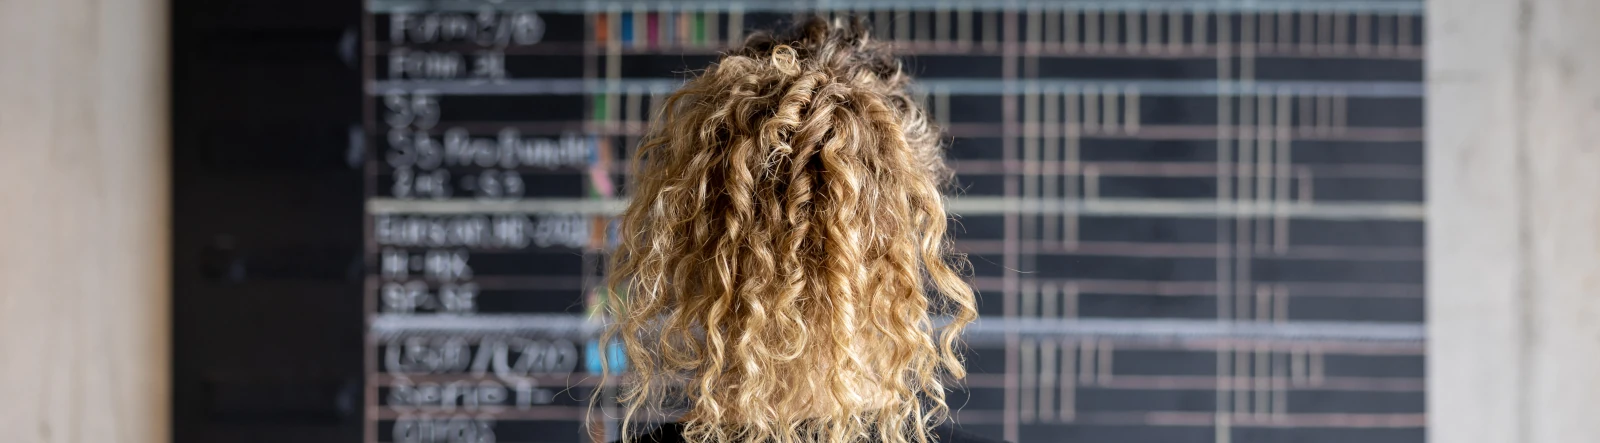 The back of the head of a woman with curly blonde hair looking at a calendar on a blackboard